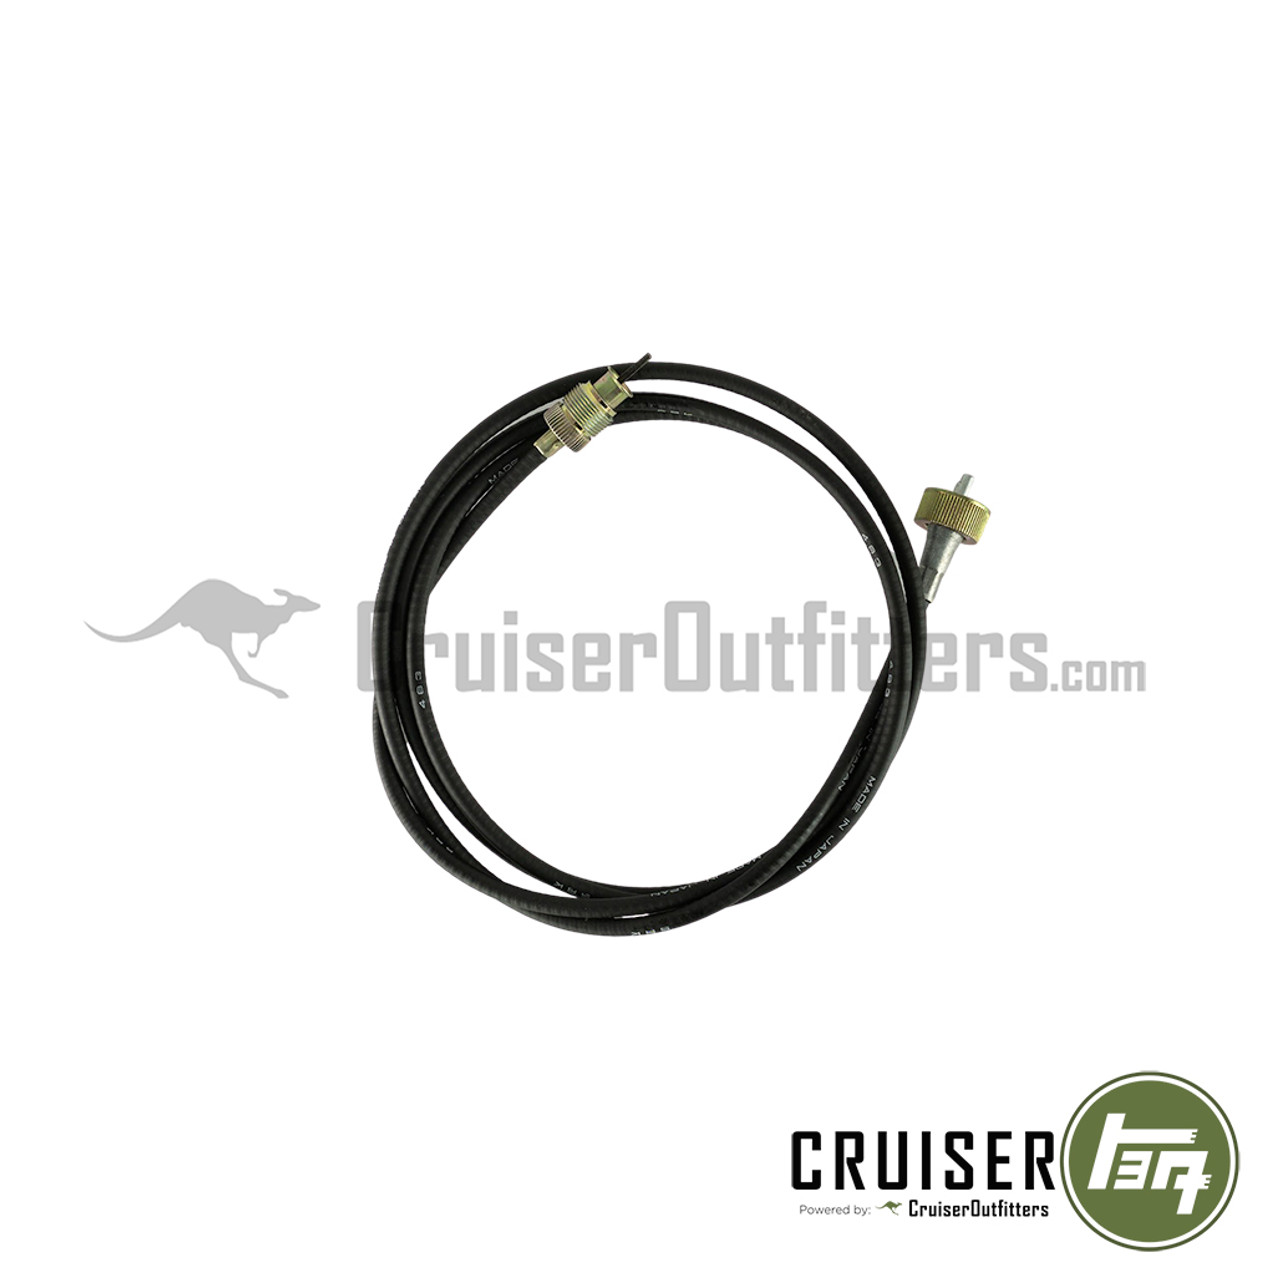 Speedometer Cable - Aftermarket - Fits Early - 1967 FJ40 (91 